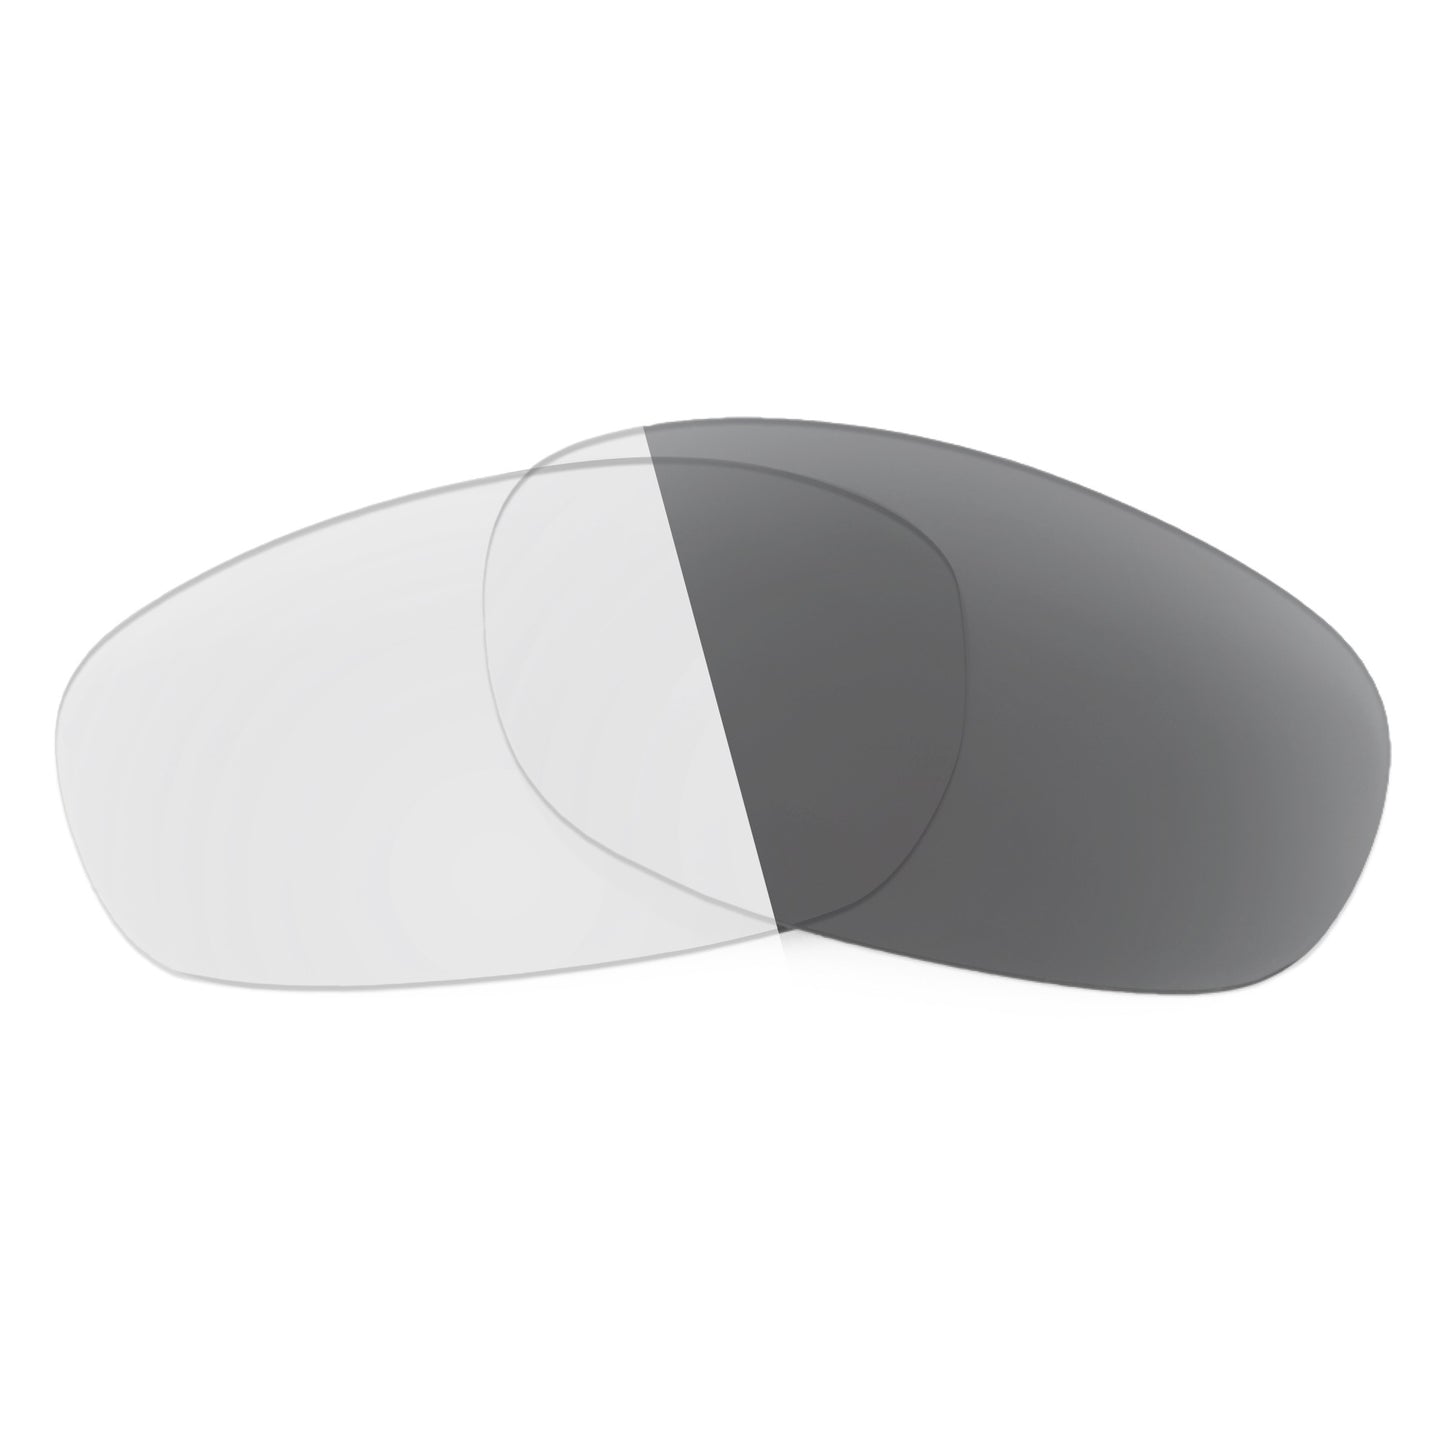 Revant replacement lenses for Ray-Ban RB3515 61mm Non-Polarized Adapt Gray Photochromic